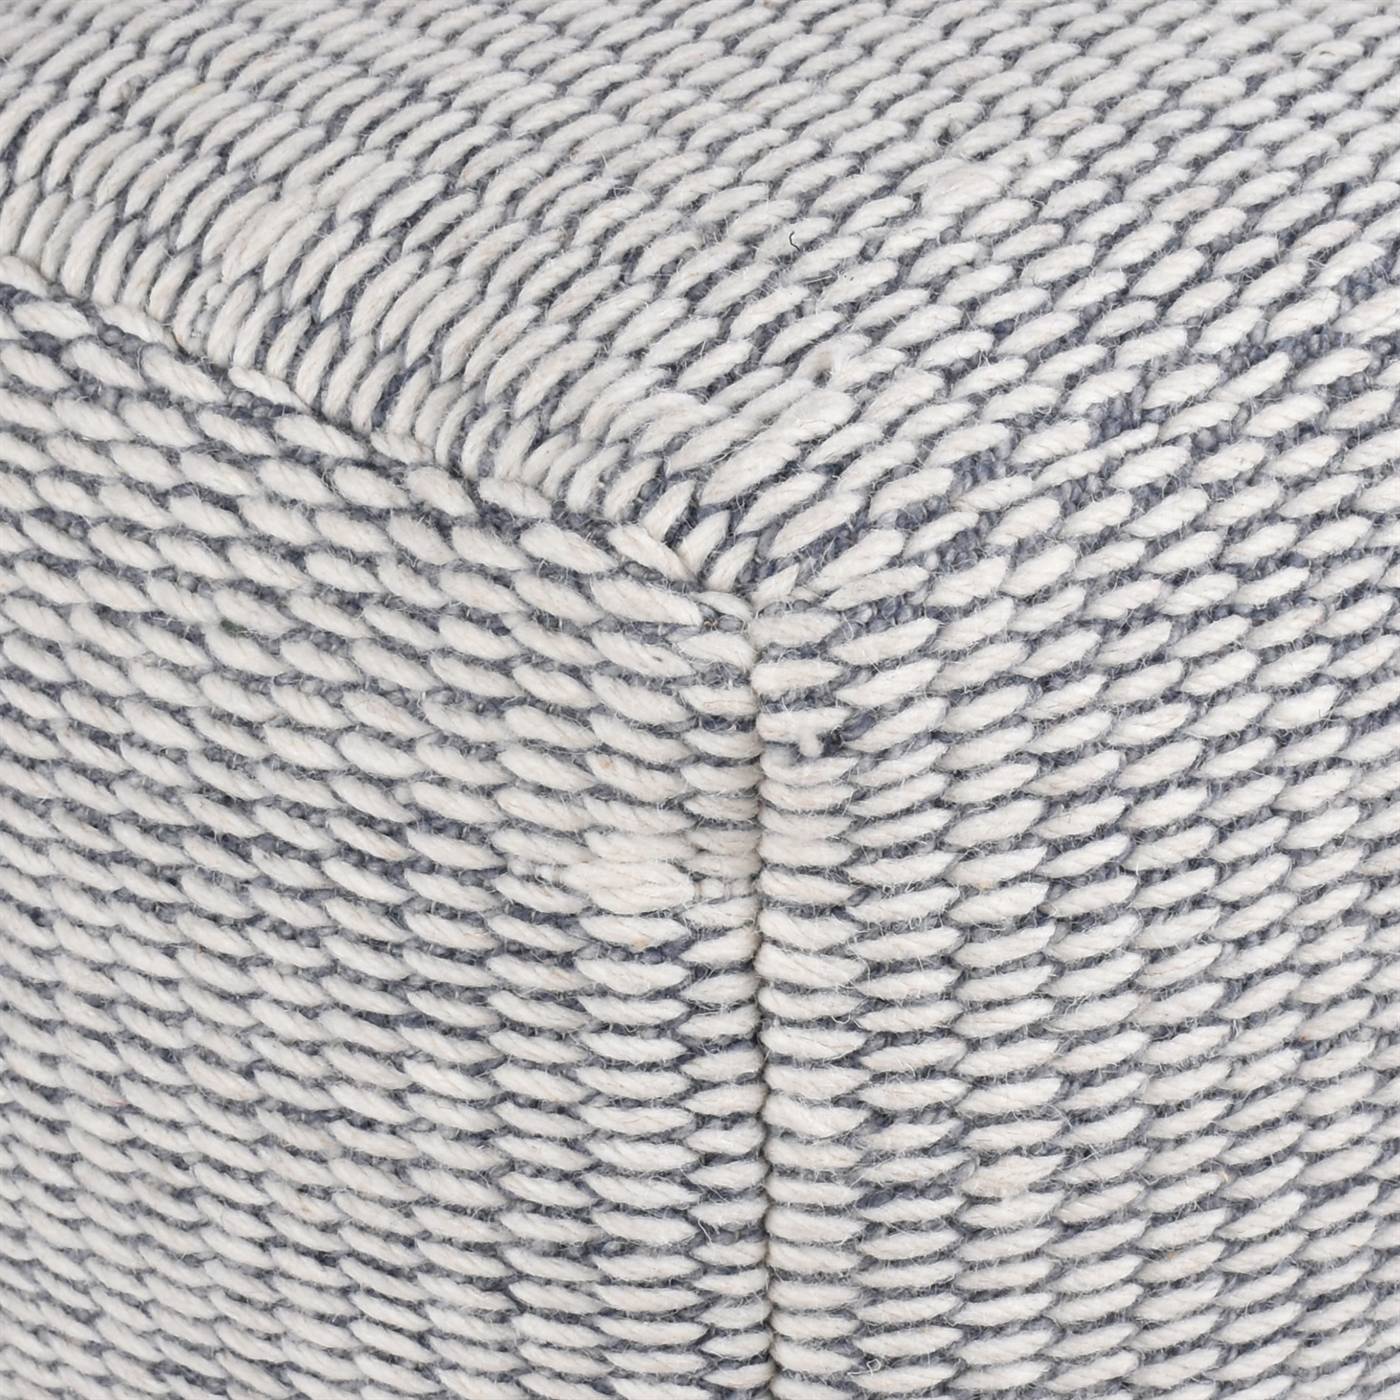 Leclaire Pouf, 40x40x40 cm, Natural White, Grey, Wool, Hand Woven, Pitloom, Flat Weave